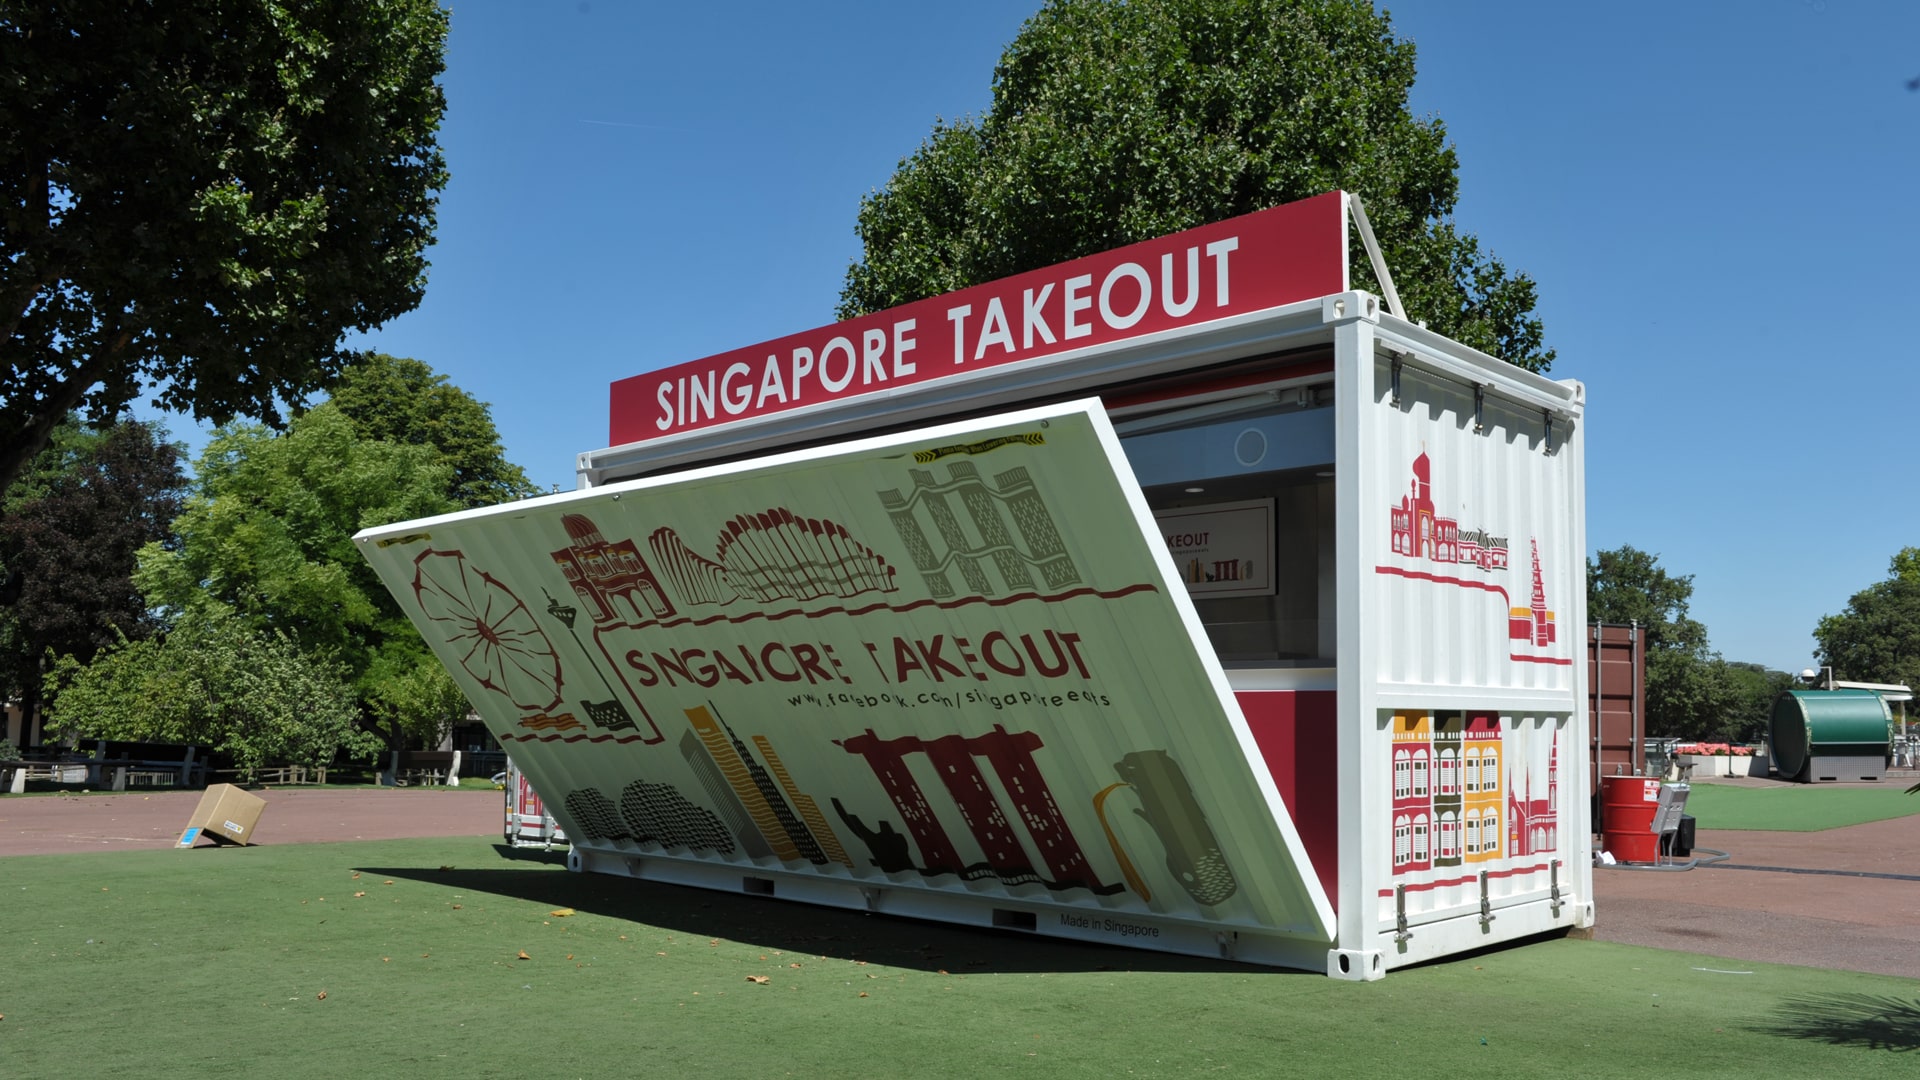 tsc_opt-images_customized-containers_singapore-takeout-paris-1920x1080-03-min